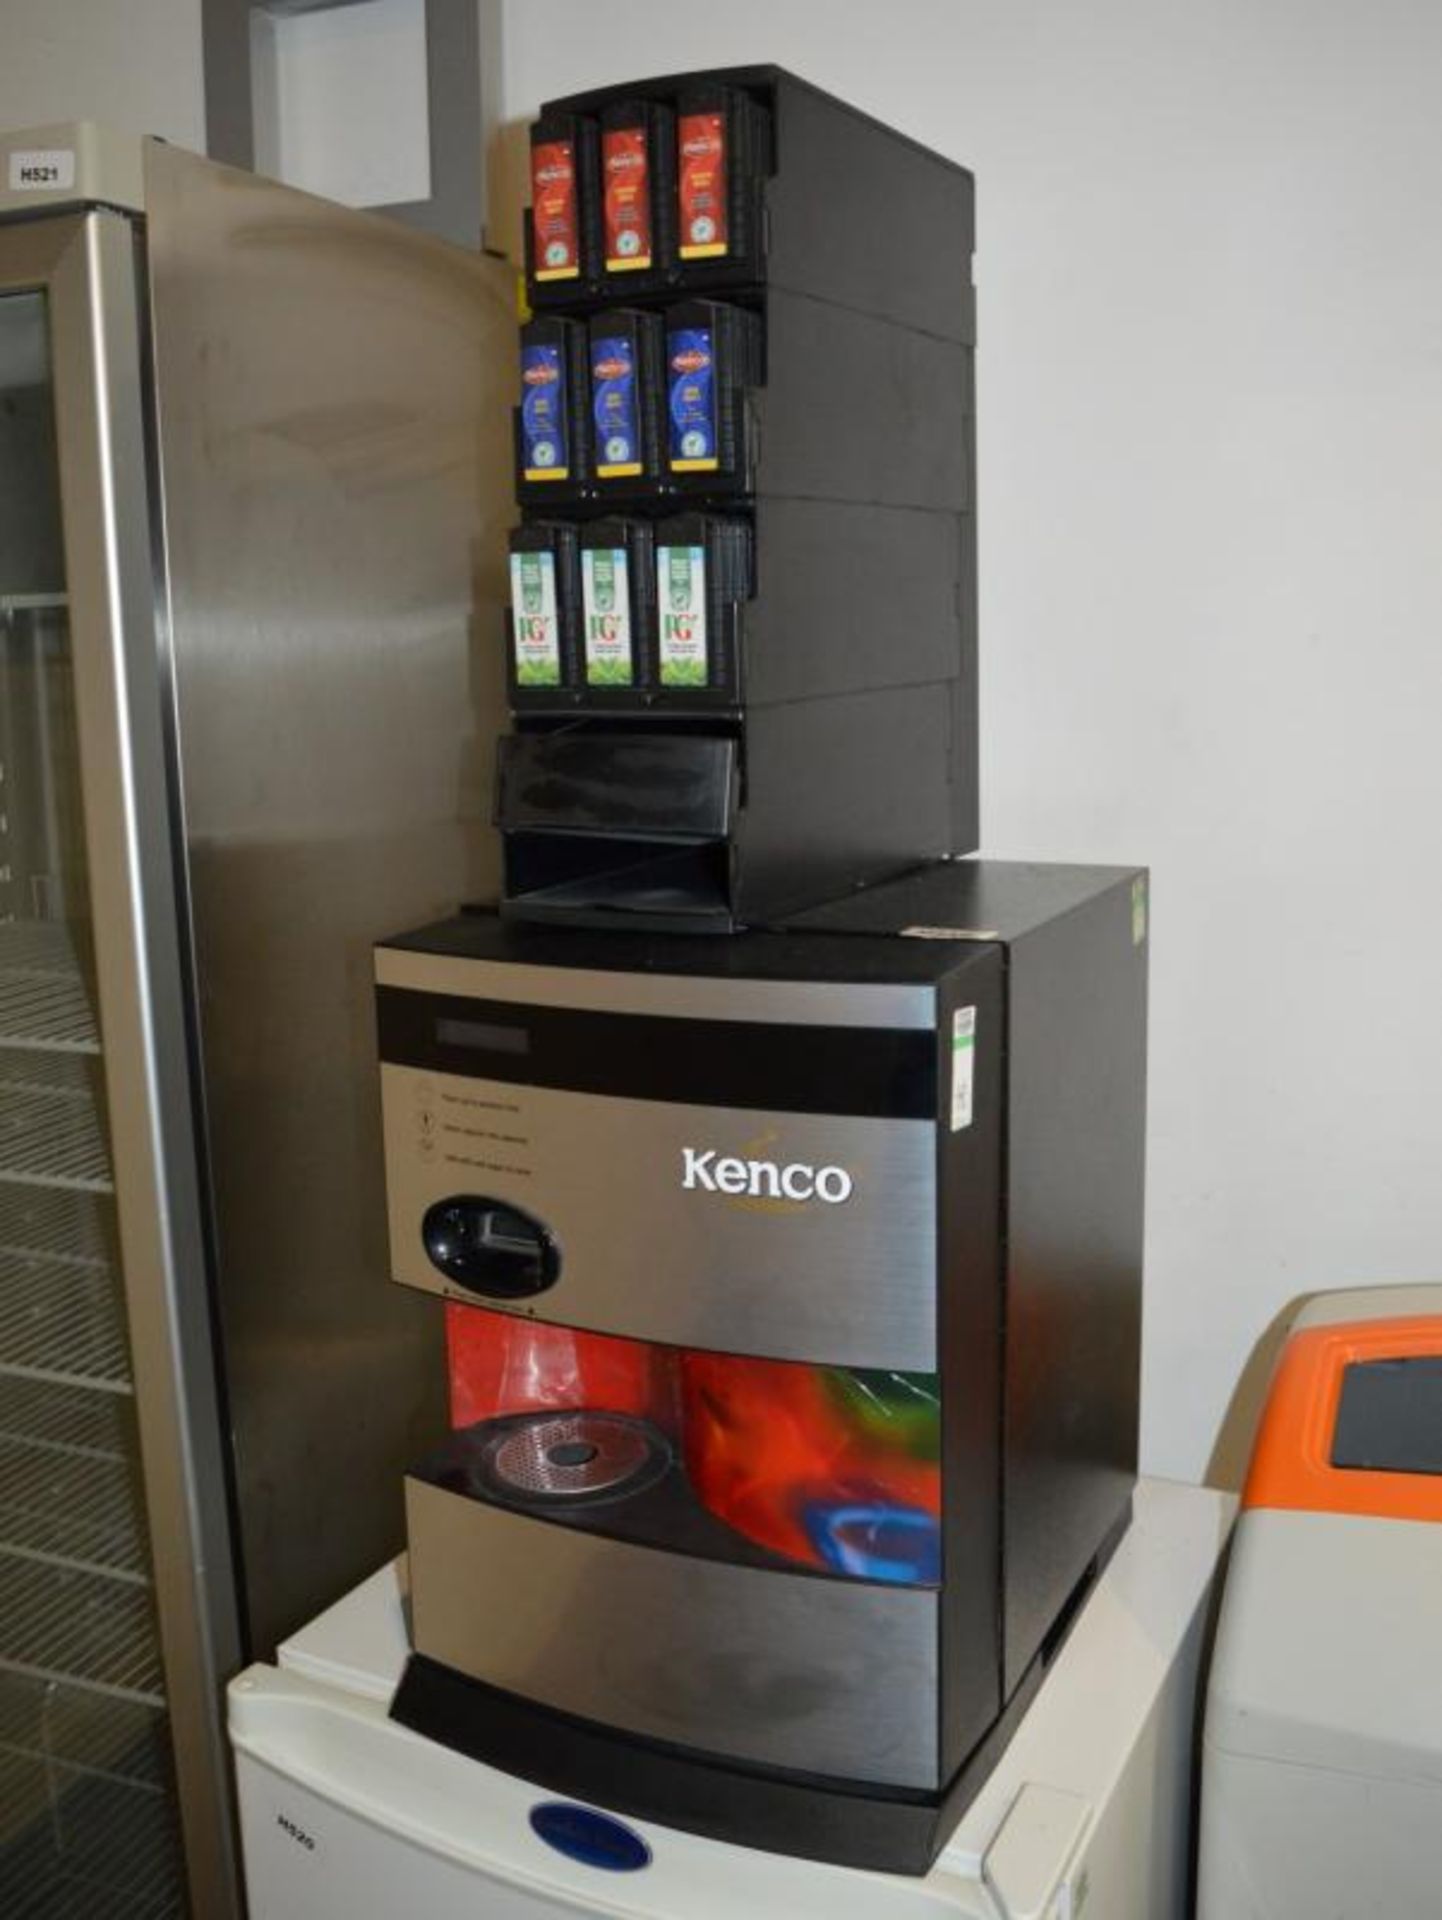 1 x Kenco Countertop Hot Drinks With Coffee and Tea Drinks Dispenser - Ref H519 - CL011 - Loc - Image 2 of 5